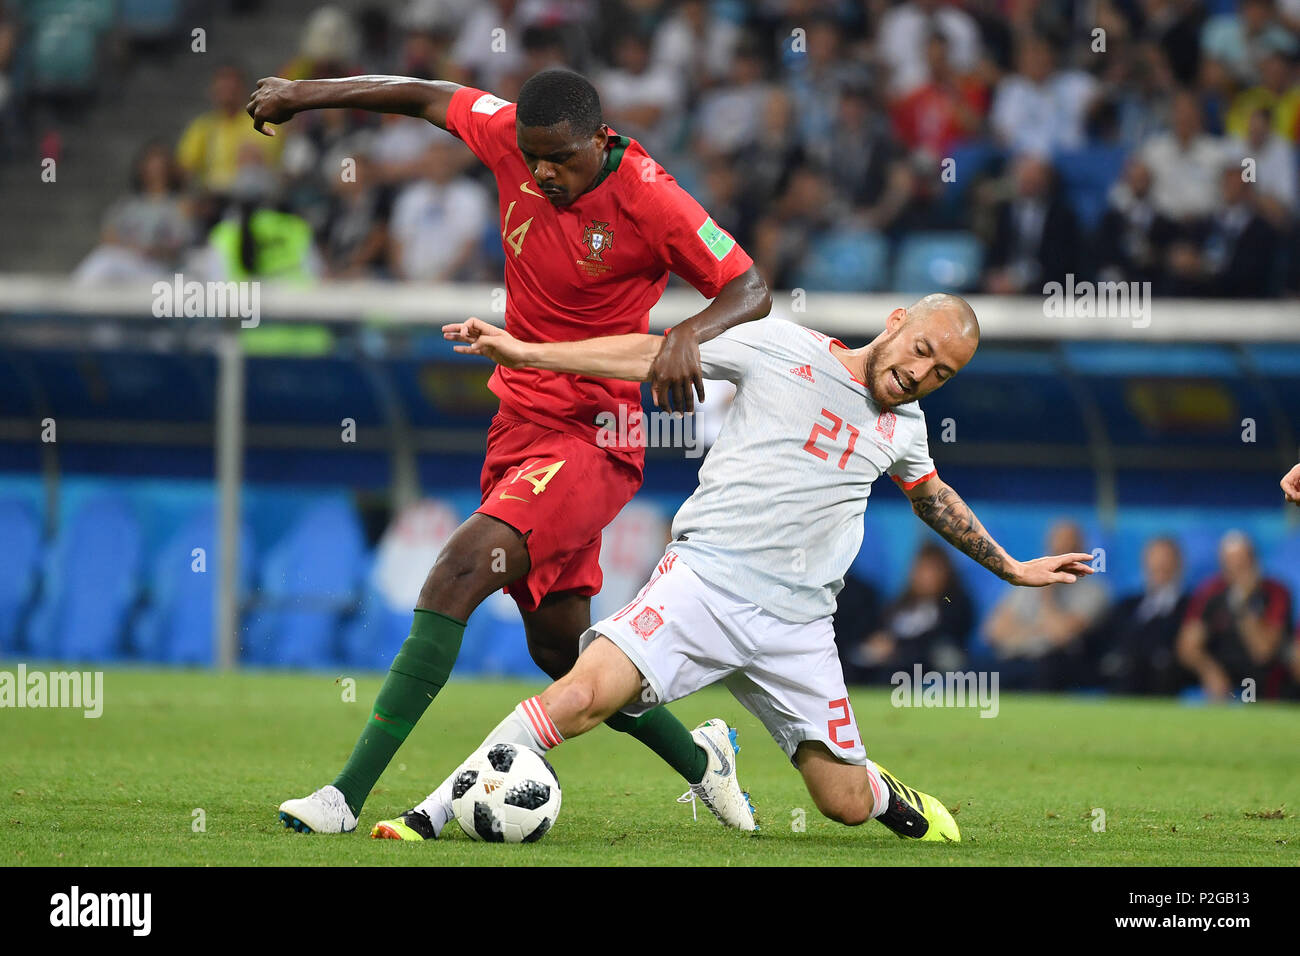 Sochi, Russland. 15th June, 2018. David SILVA (ESP, re), action, duels versus William CARVALHO (POR). Portugal (POR) - Spain (ESP) 3-3, Preliminary Round, Group B, Game 1, on 15.06.2018 in SOCHI, Fisht Olymipic Stadium. Football World Cup 2018 in Russia from 14.06. - 15.07.2018. | usage worldwide Credit: dpa/Alamy Live News Stock Photo